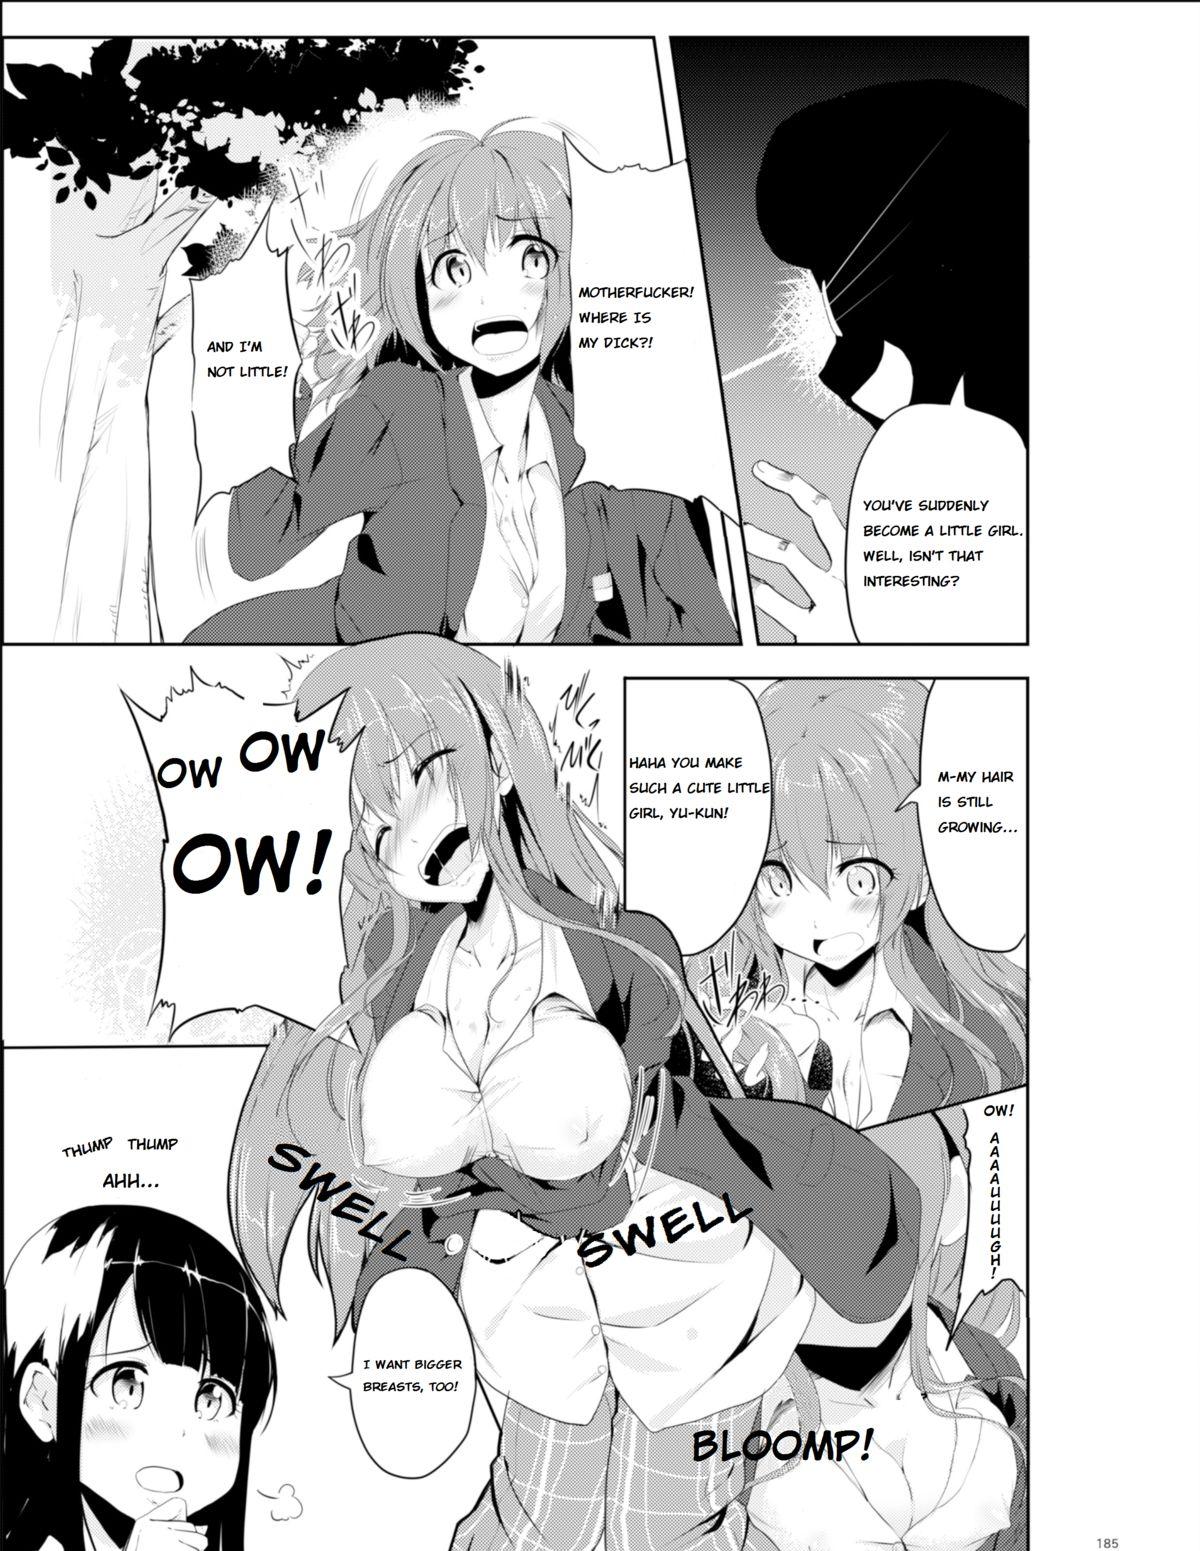 Twerk [TSF no F (Hyouga.)] "The Painted Lady" (English) - Ongoing Breasts - Page 5